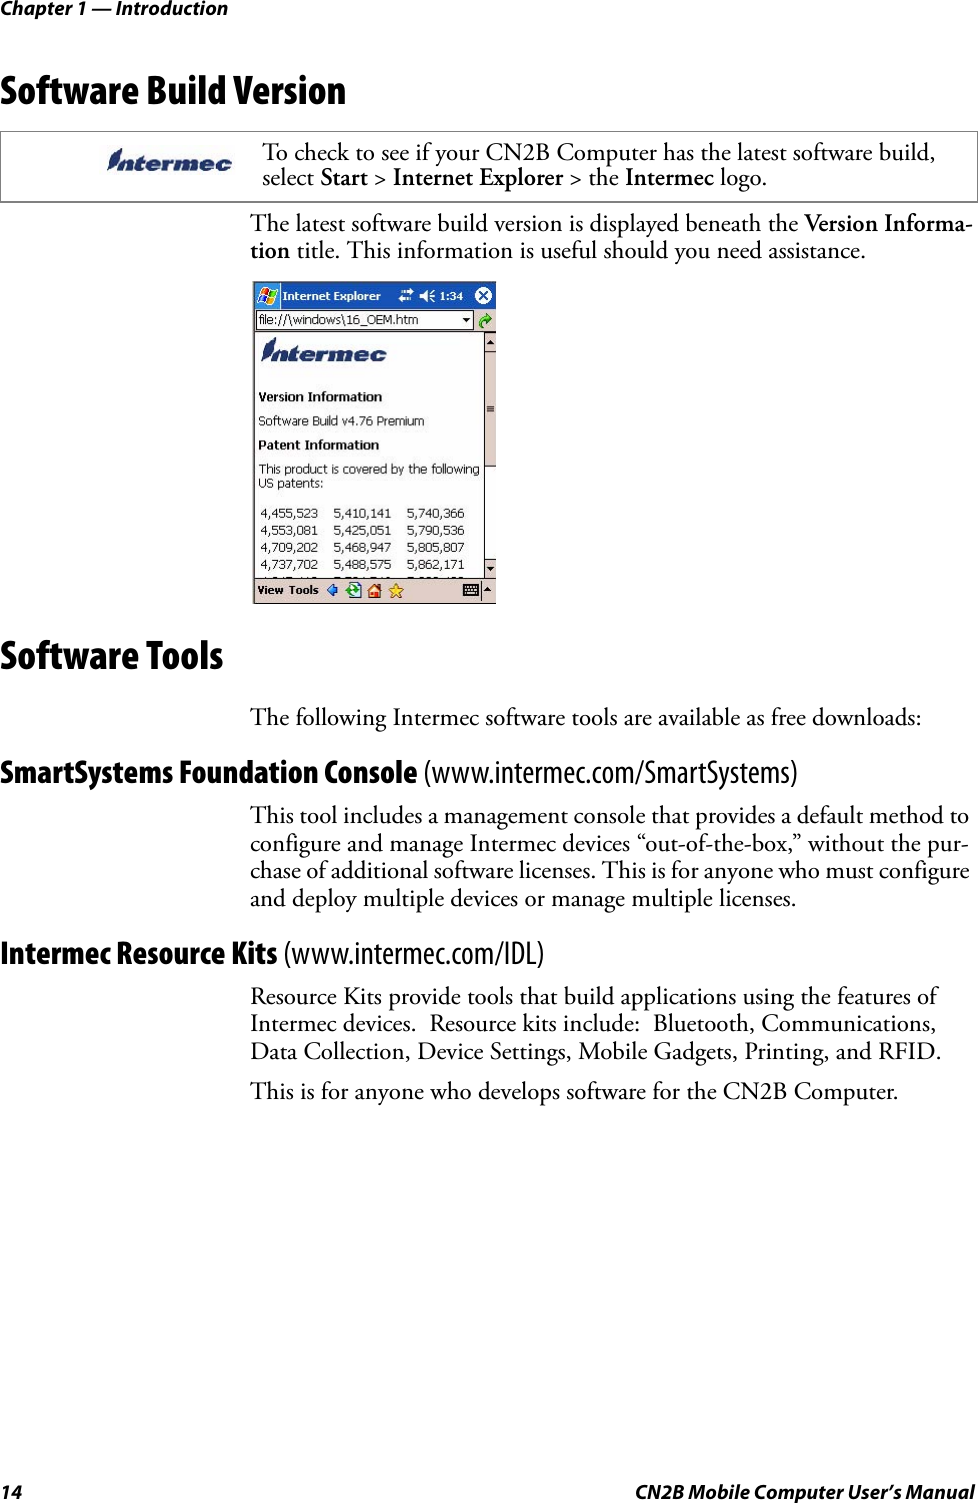 Chapter 1 — Introduction14 CN2B Mobile Computer User’s ManualSoftware Build VersionThe latest software build version is displayed beneath the Version Informa-tion title. This information is useful should you need assistance.Software ToolsThe following Intermec software tools are available as free downloads:SmartSystems Foundation Console (www.intermec.com/SmartSystems)This tool includes a management console that provides a default method to configure and manage Intermec devices “out-of-the-box,” without the pur-chase of additional software licenses. This is for anyone who must configure and deploy multiple devices or manage multiple licenses.Intermec Resource Kits (www.intermec.com/IDL)Resource Kits provide tools that build applications using the features of Intermec devices.  Resource kits include:  Bluetooth, Communications, Data Collection, Device Settings, Mobile Gadgets, Printing, and RFID.This is for anyone who develops software for the CN2B Computer.To check to see if your CN2B Computer has the latest software build, select Start &gt; Internet Explorer &gt; the Intermec logo.